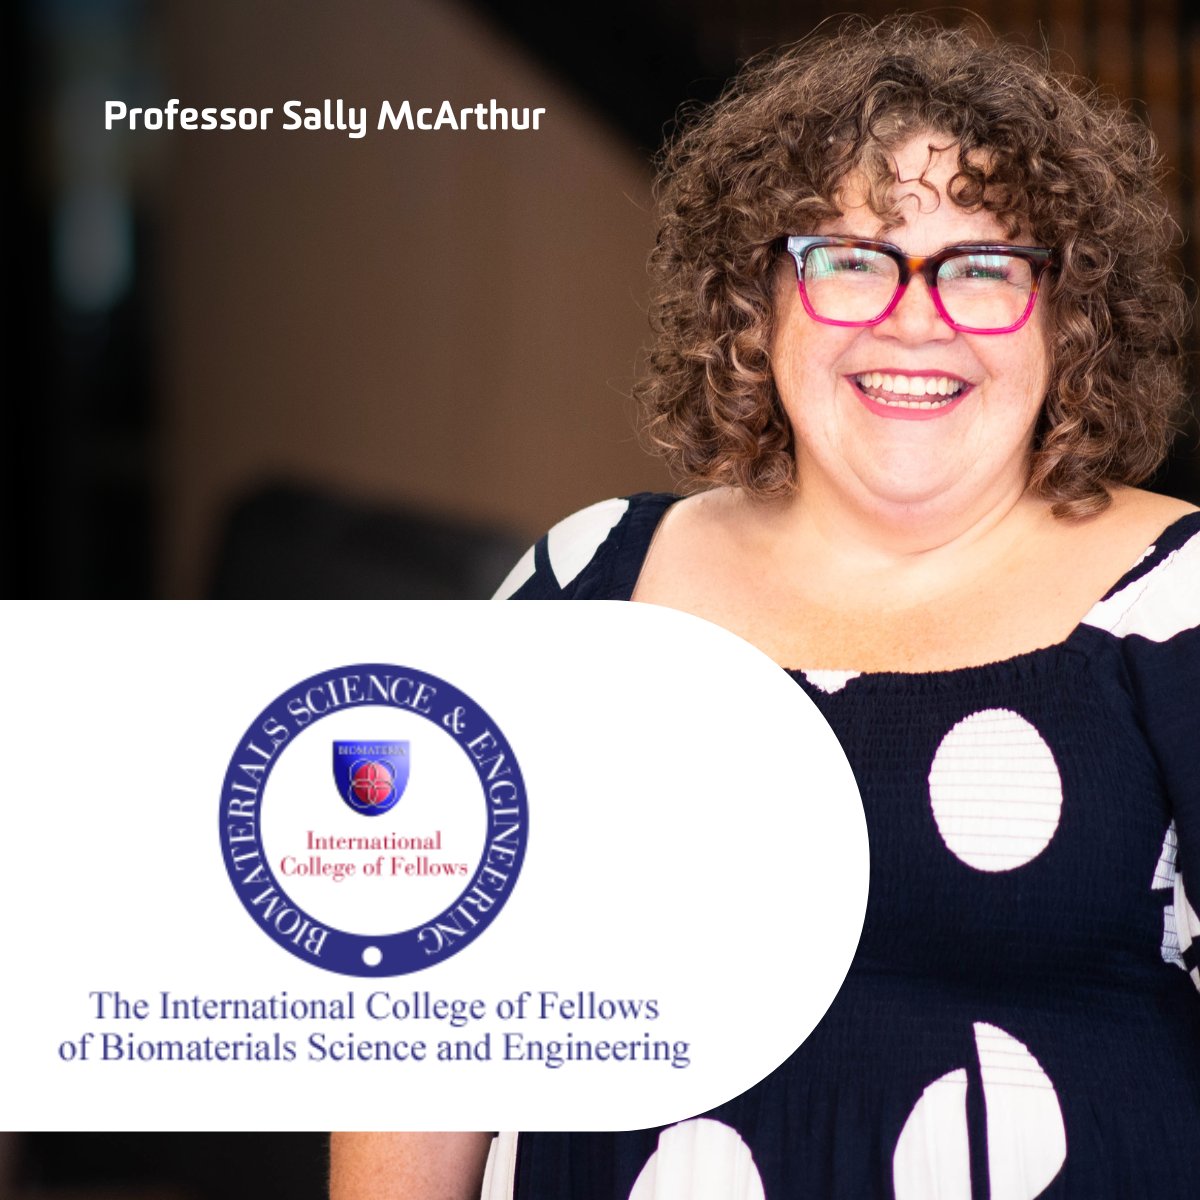 Our Director Prof. Sally McArthur has achieved the highest honour within the global biomaterials community – a Fellow of Biomaterials Science and Engineering! @mca178 is among the top 10% of the most highly regarded #biomaterials scientists in the world. bit.ly/3GsGQ0e